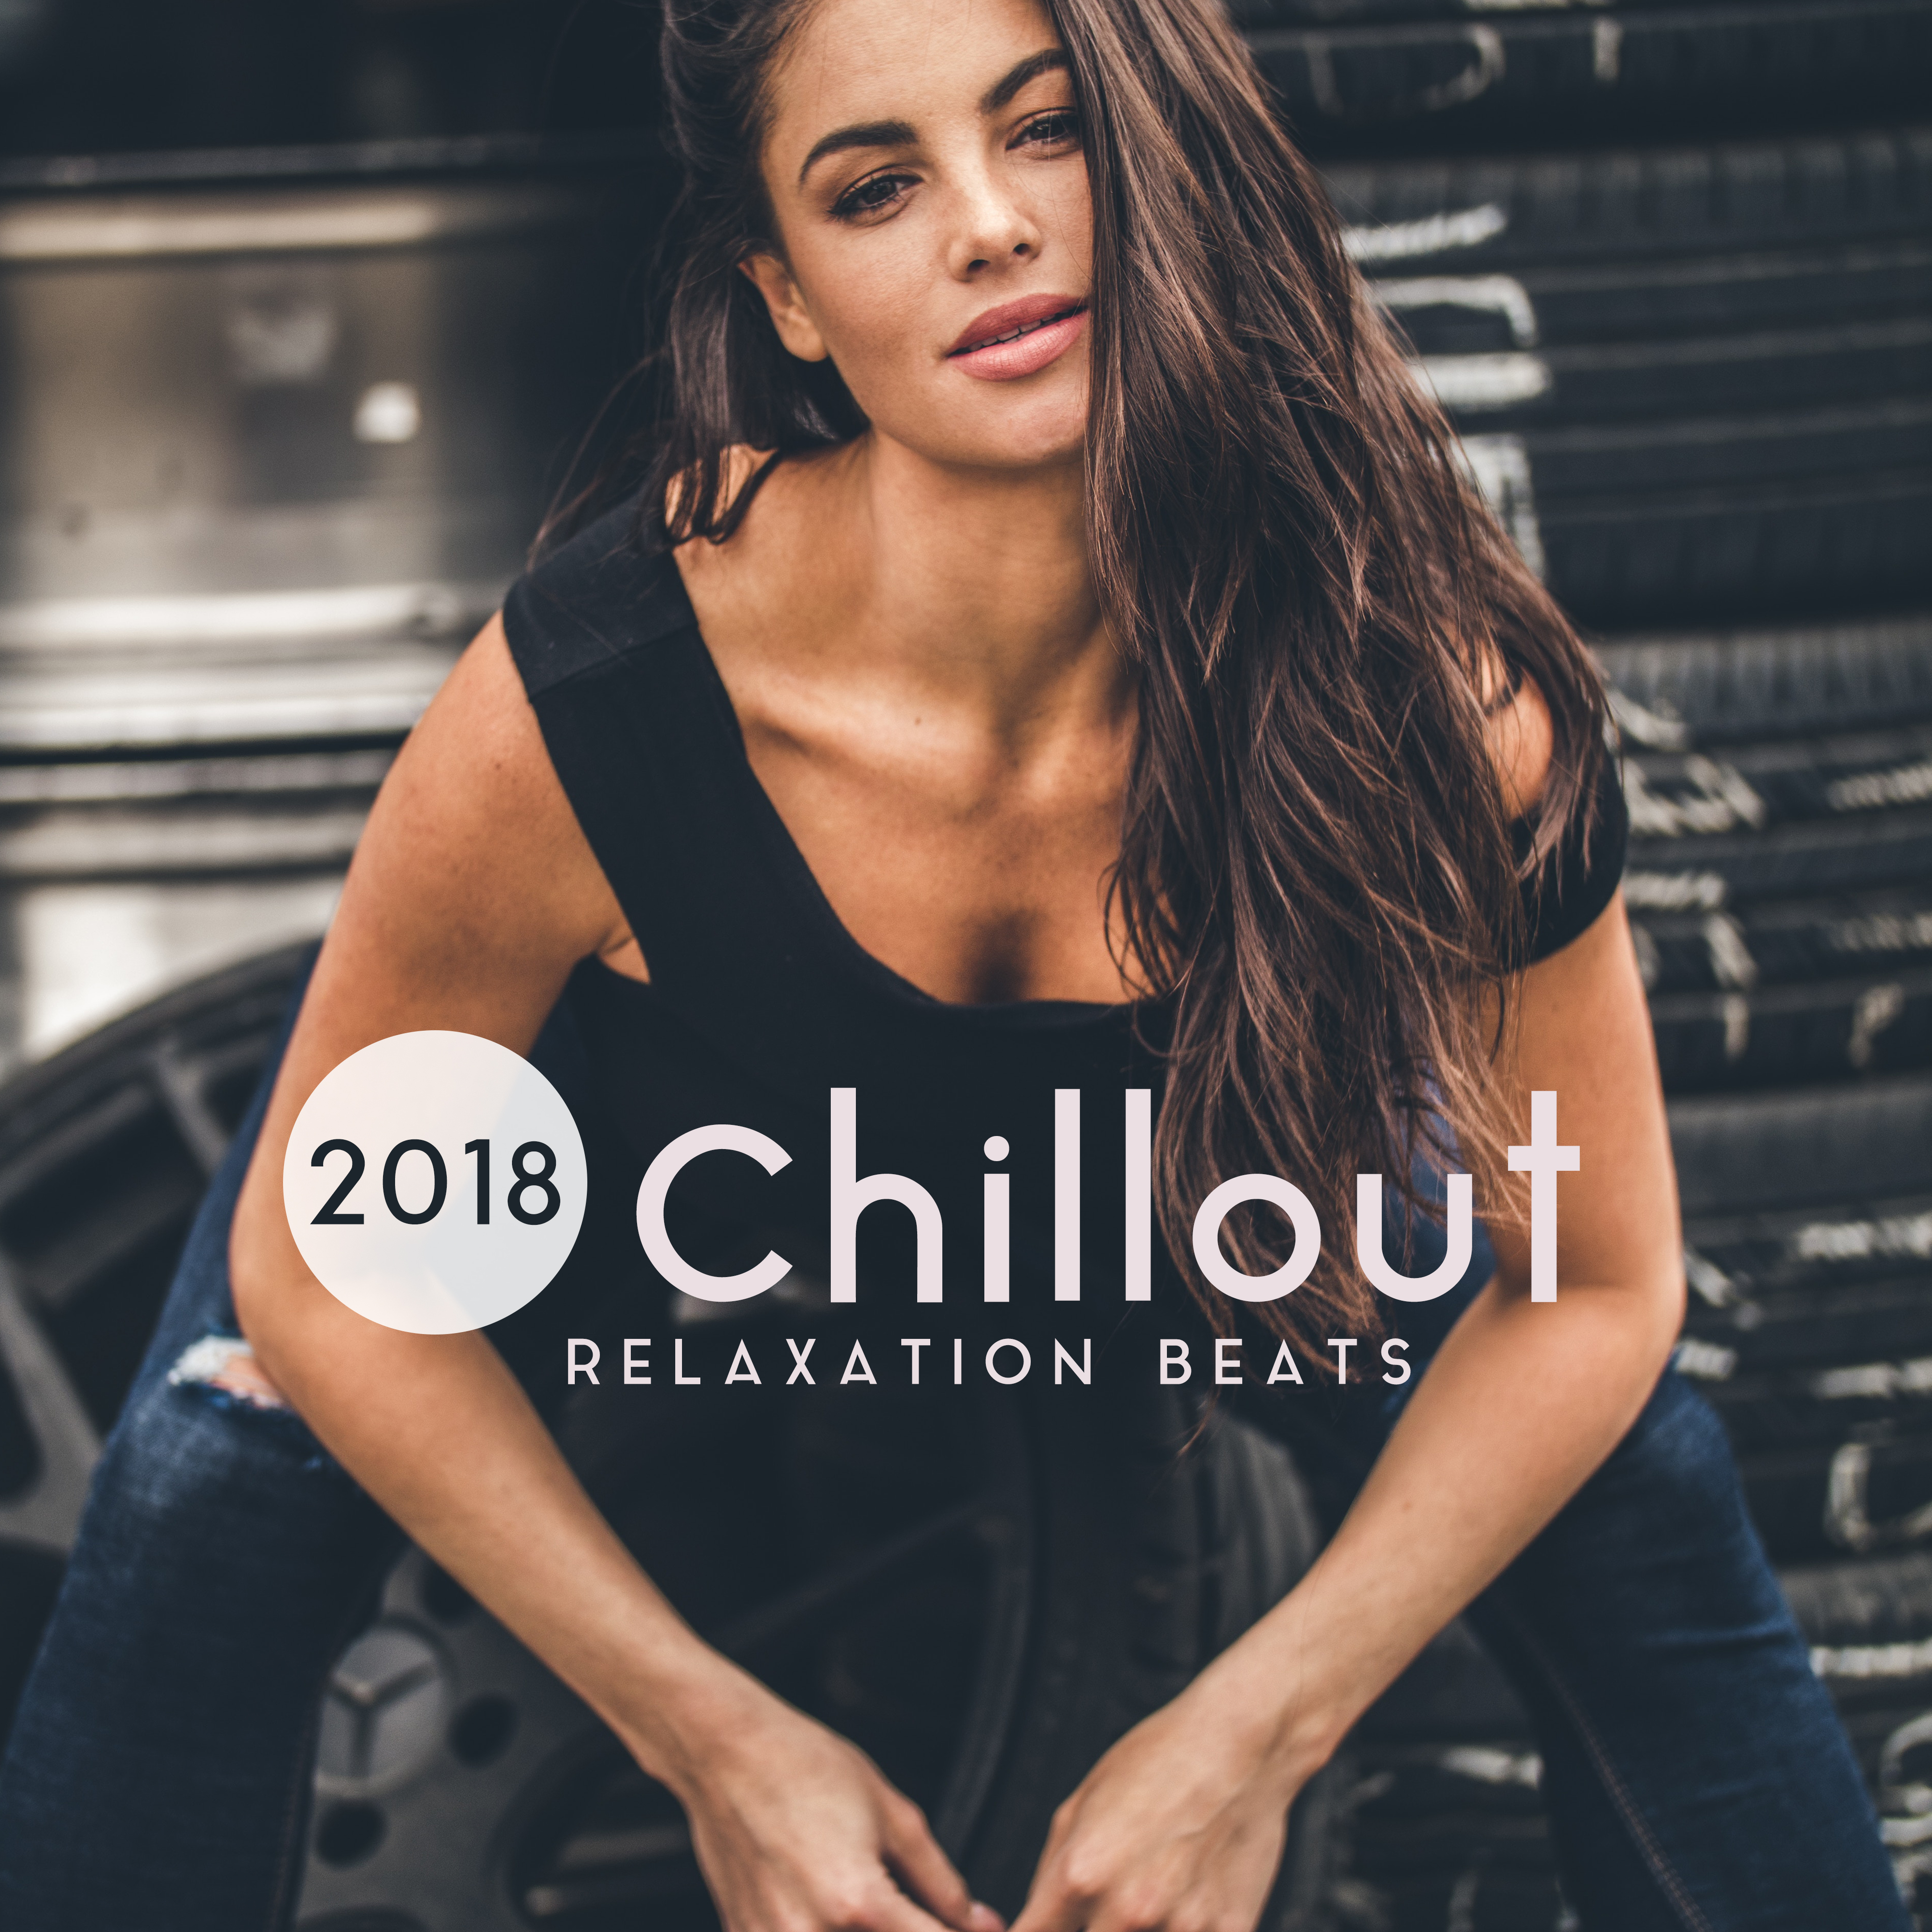 2018 Chillout Relaxation Beats